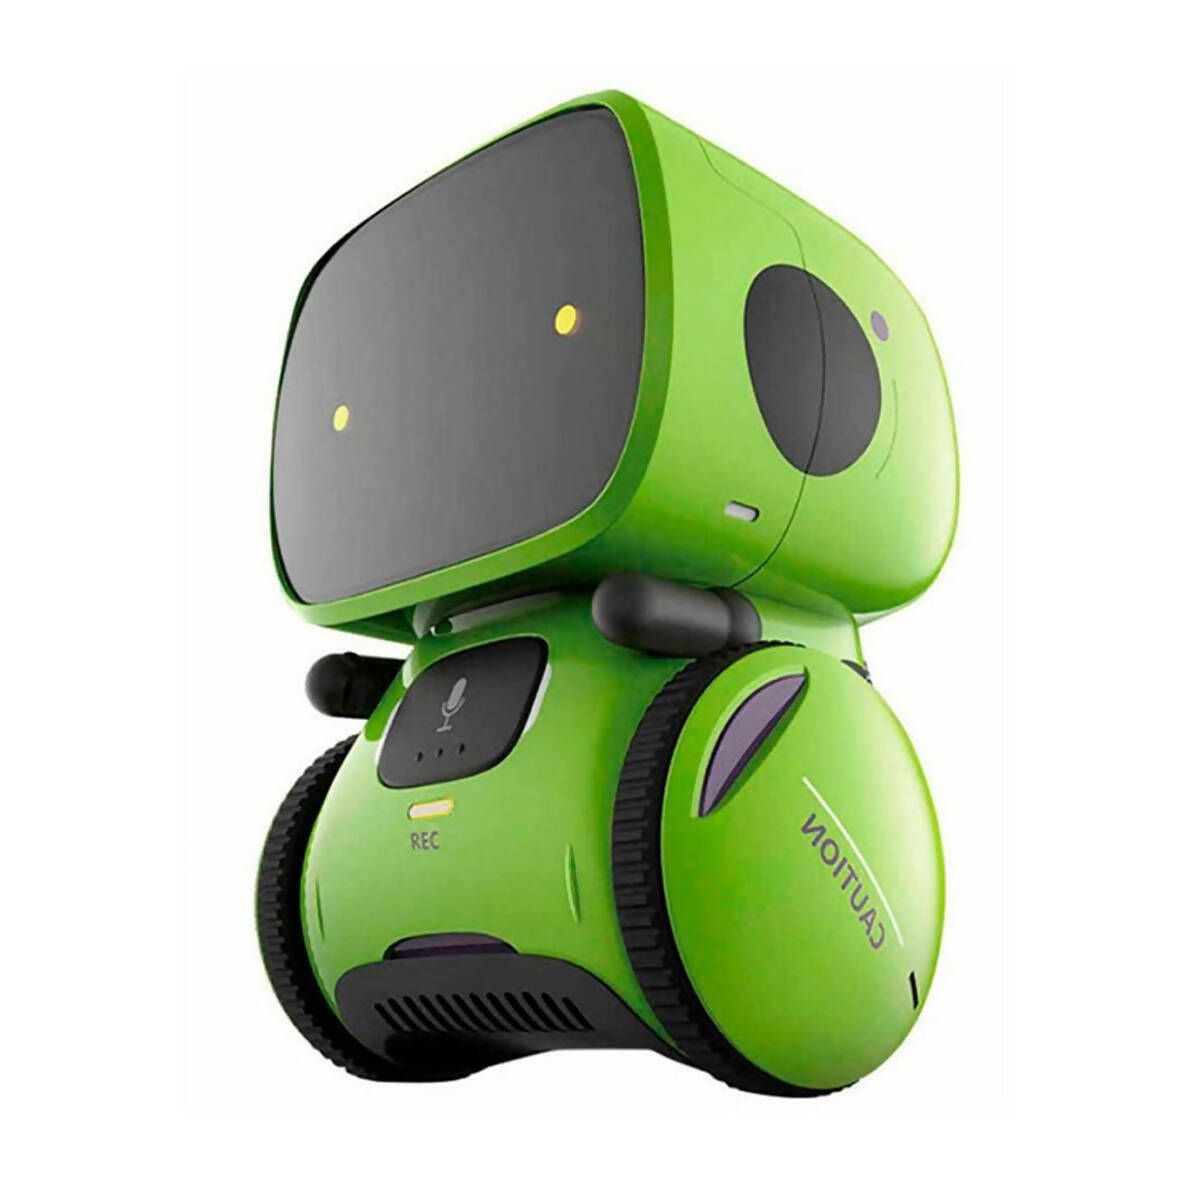 Smart AI - Voice Control and Touch Interactive Dancing Robot Toy